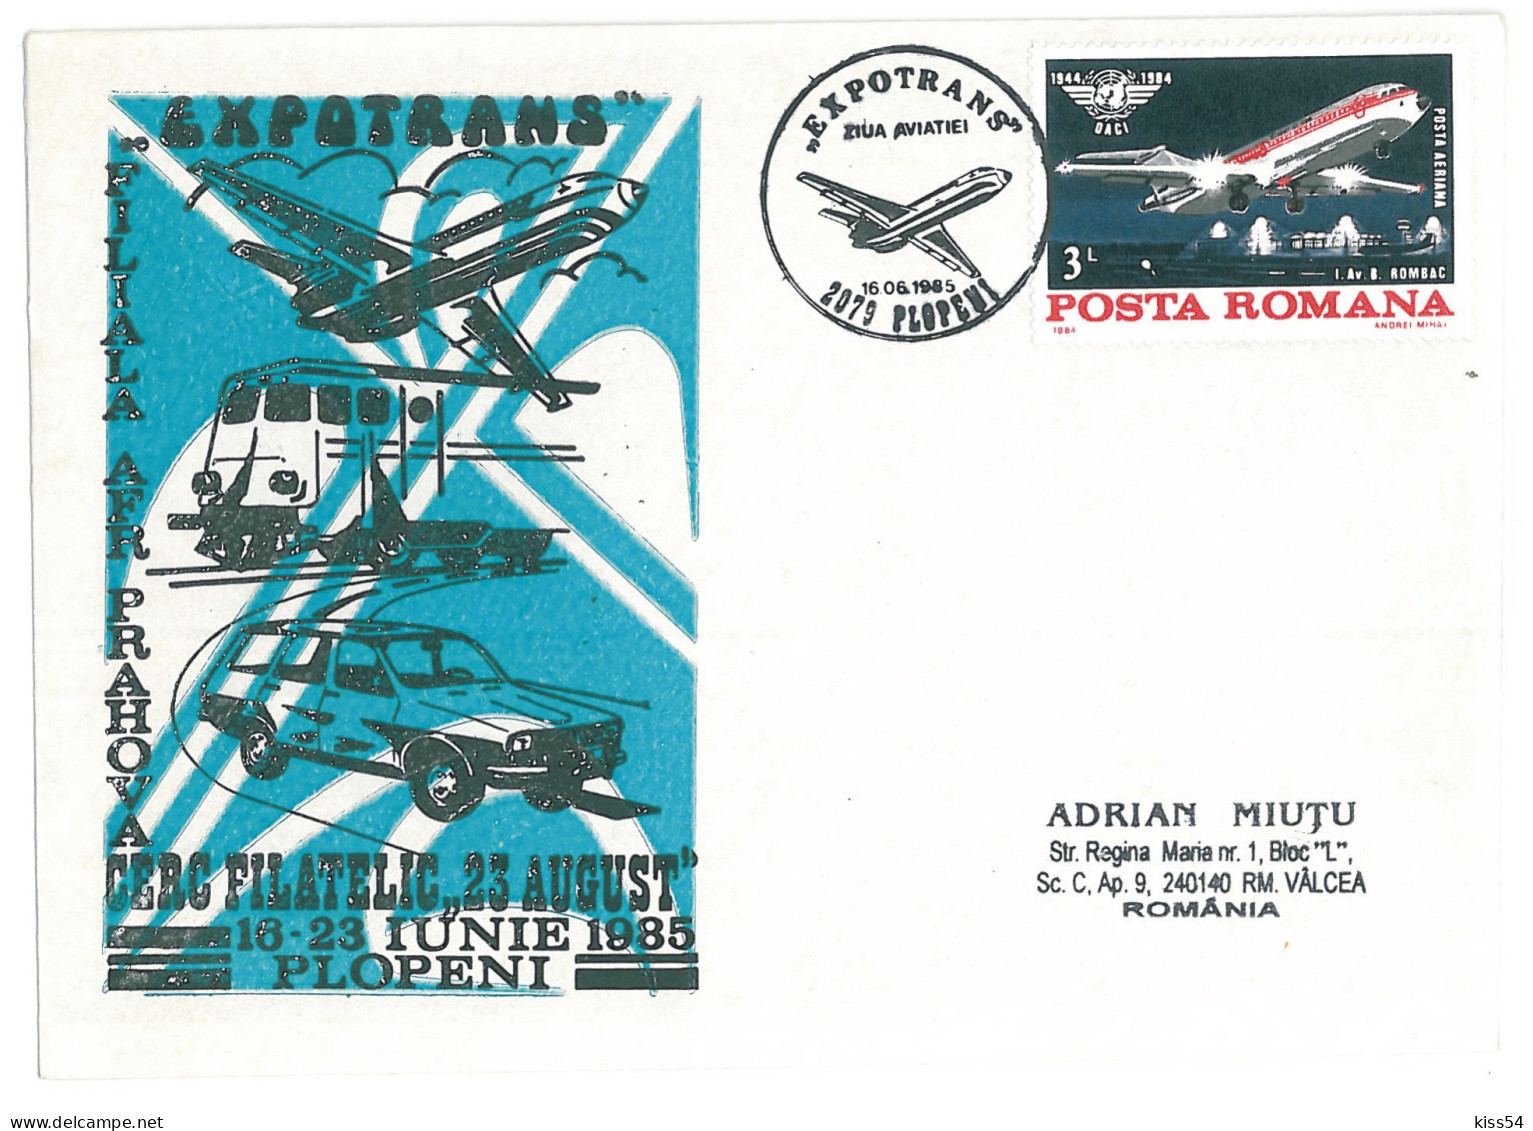 COV 23 - 202 AIRPLANE, Romania - Cover - Used - 1985 - Covers & Documents